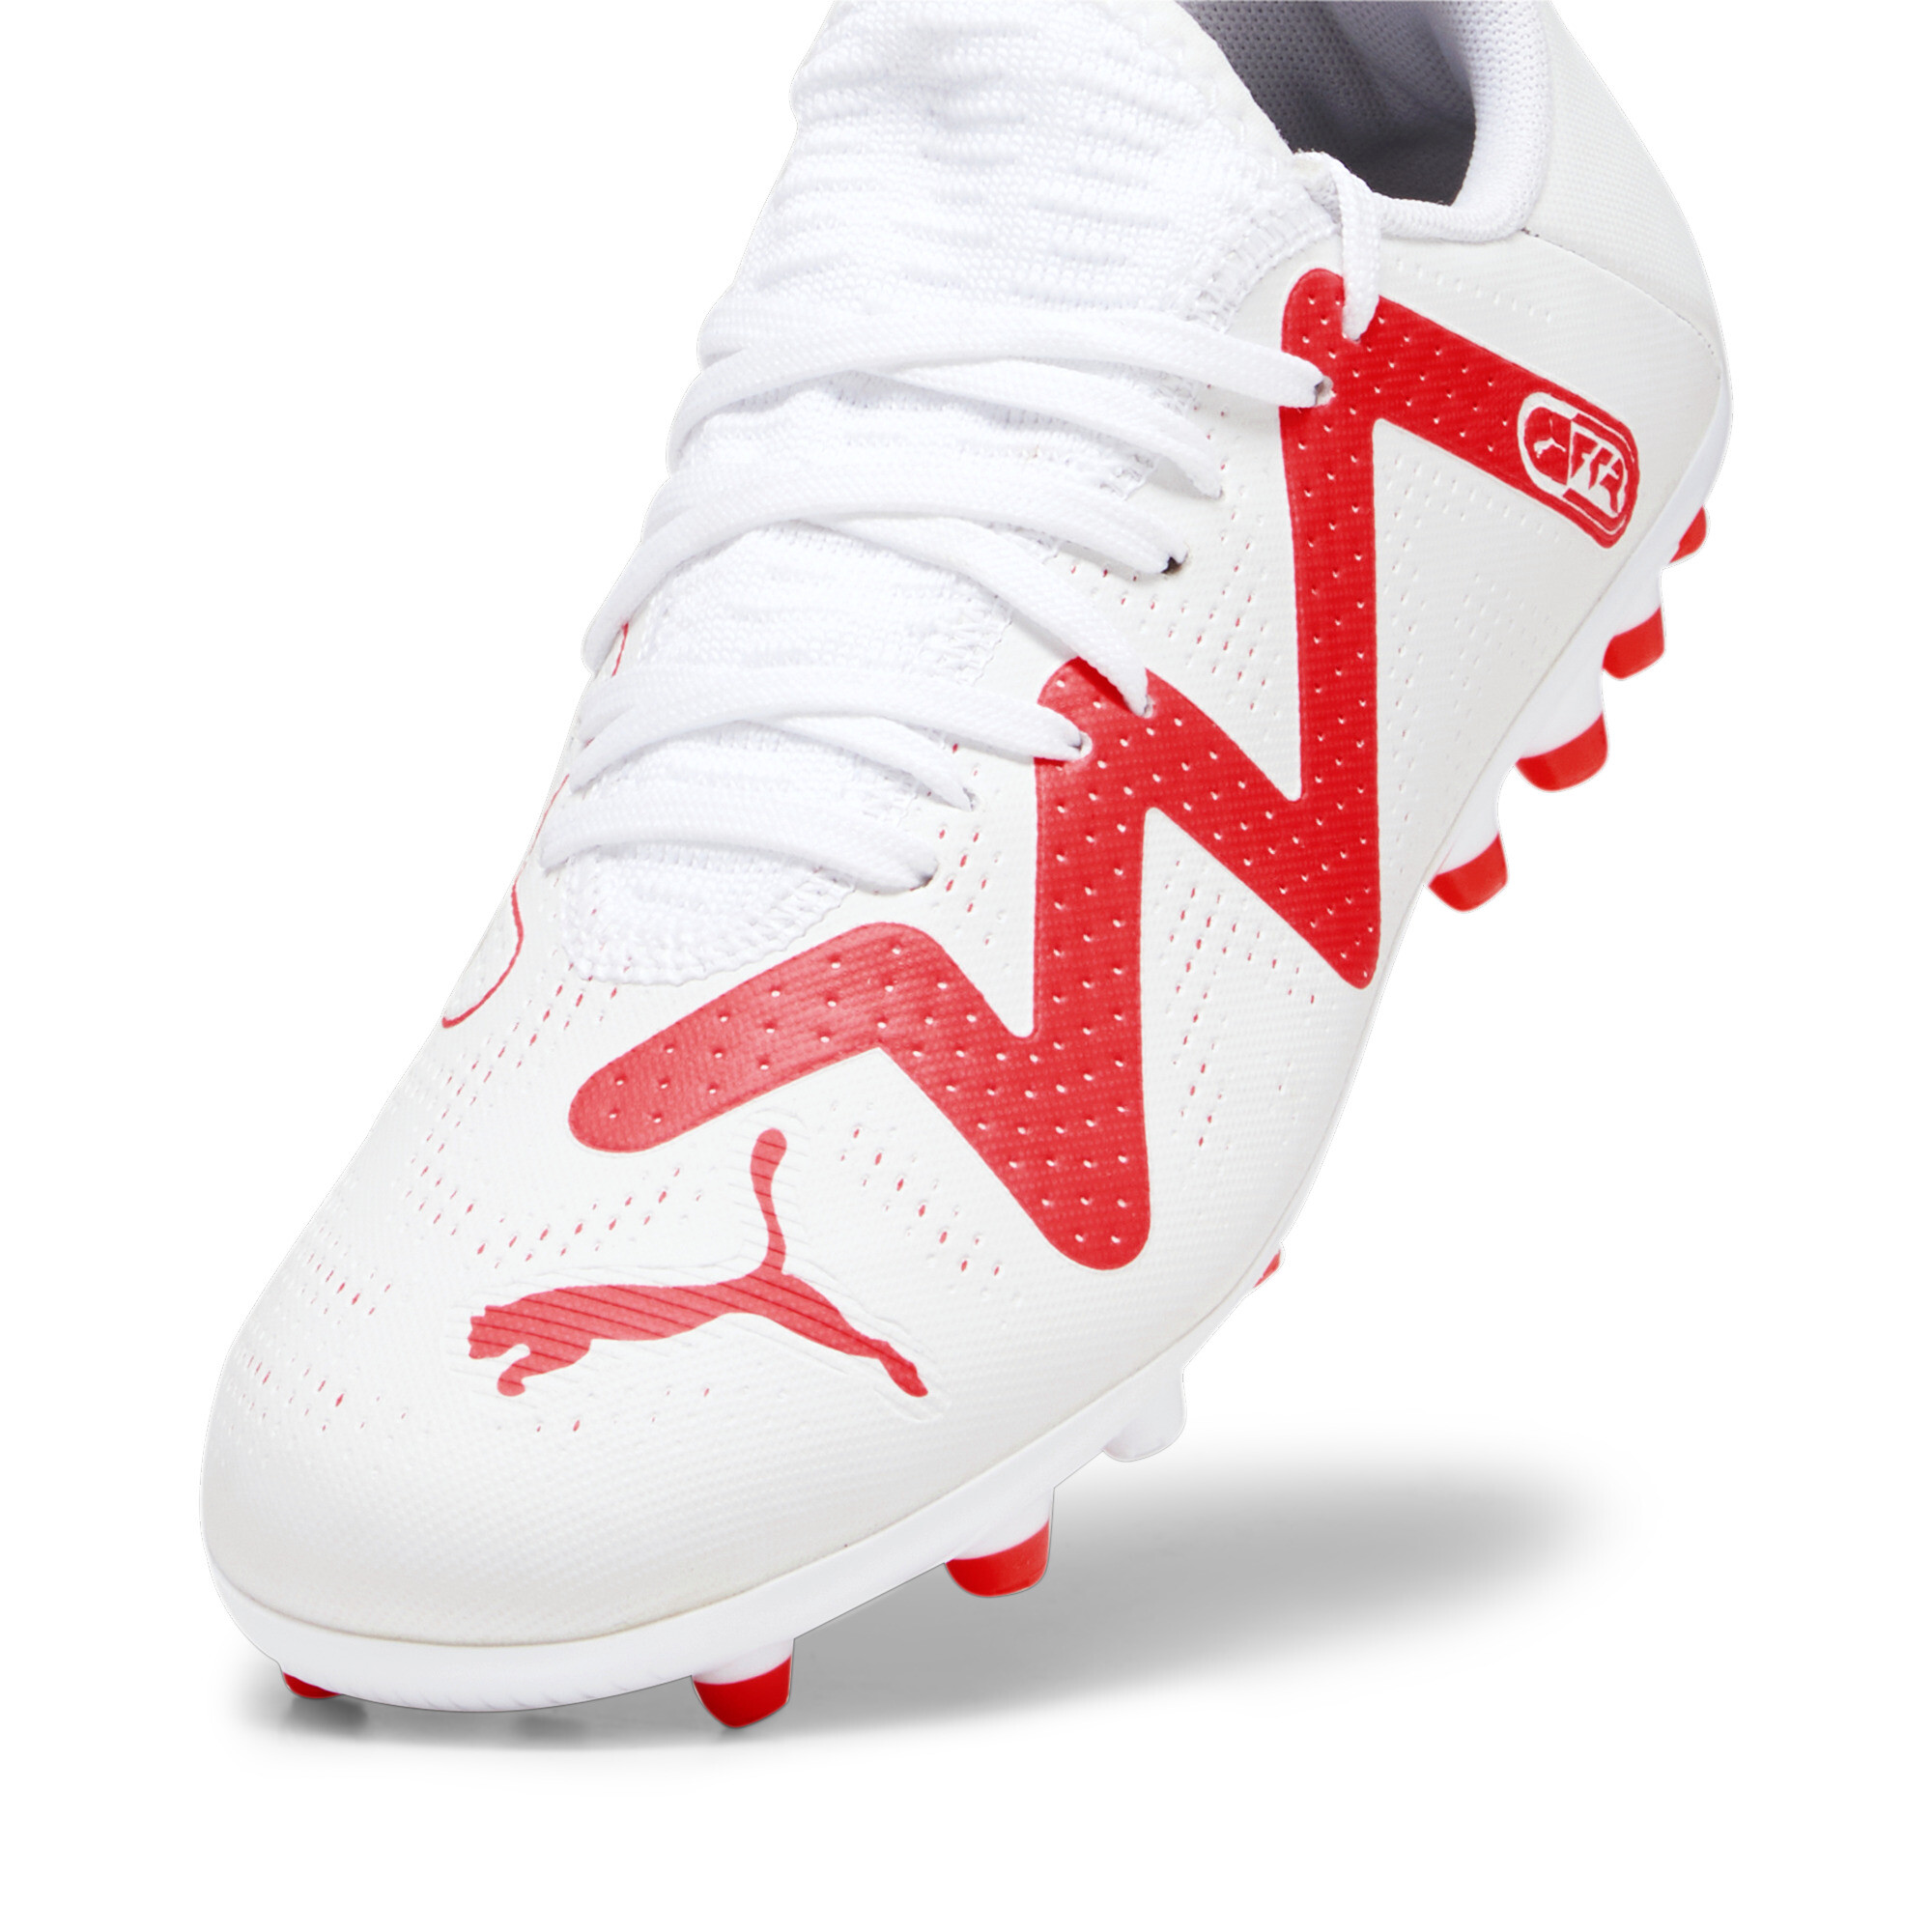 Puma FUTURE PLAY MG Youth Football Boots, White, Size 30, Shoes